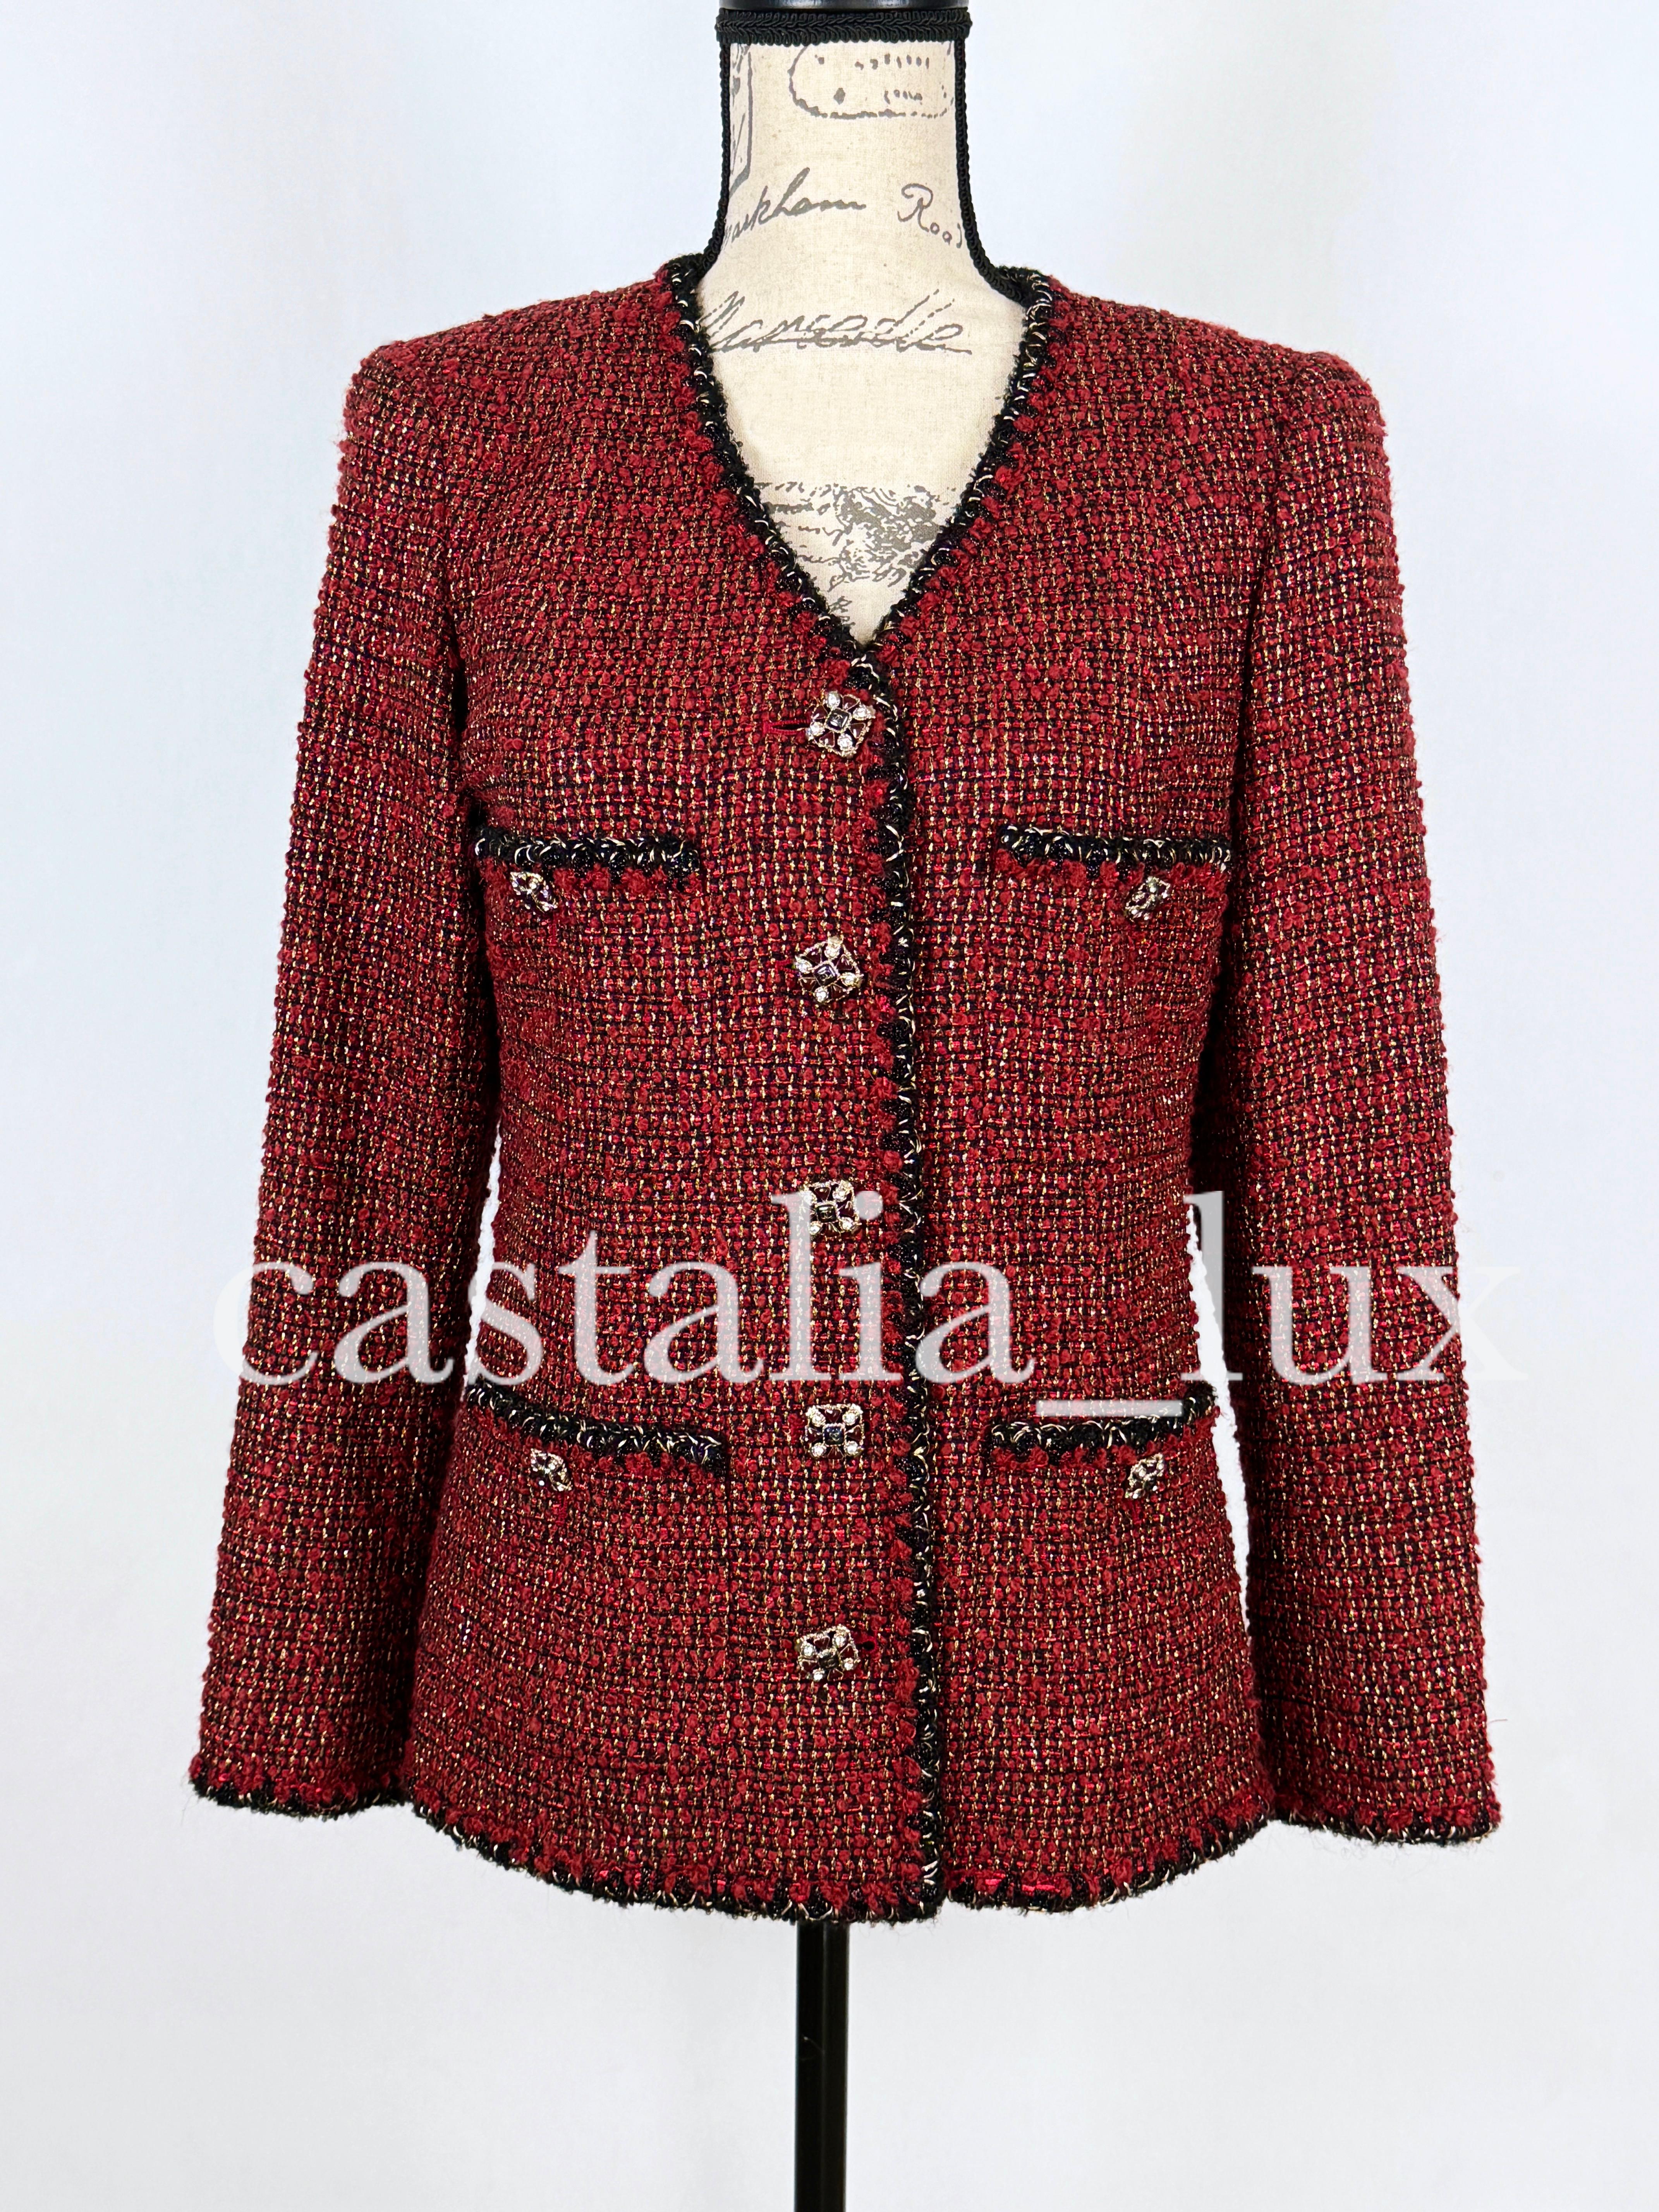 Chanel New Iconic CC Jewel Buttons Lesage Tweed Jacket 5